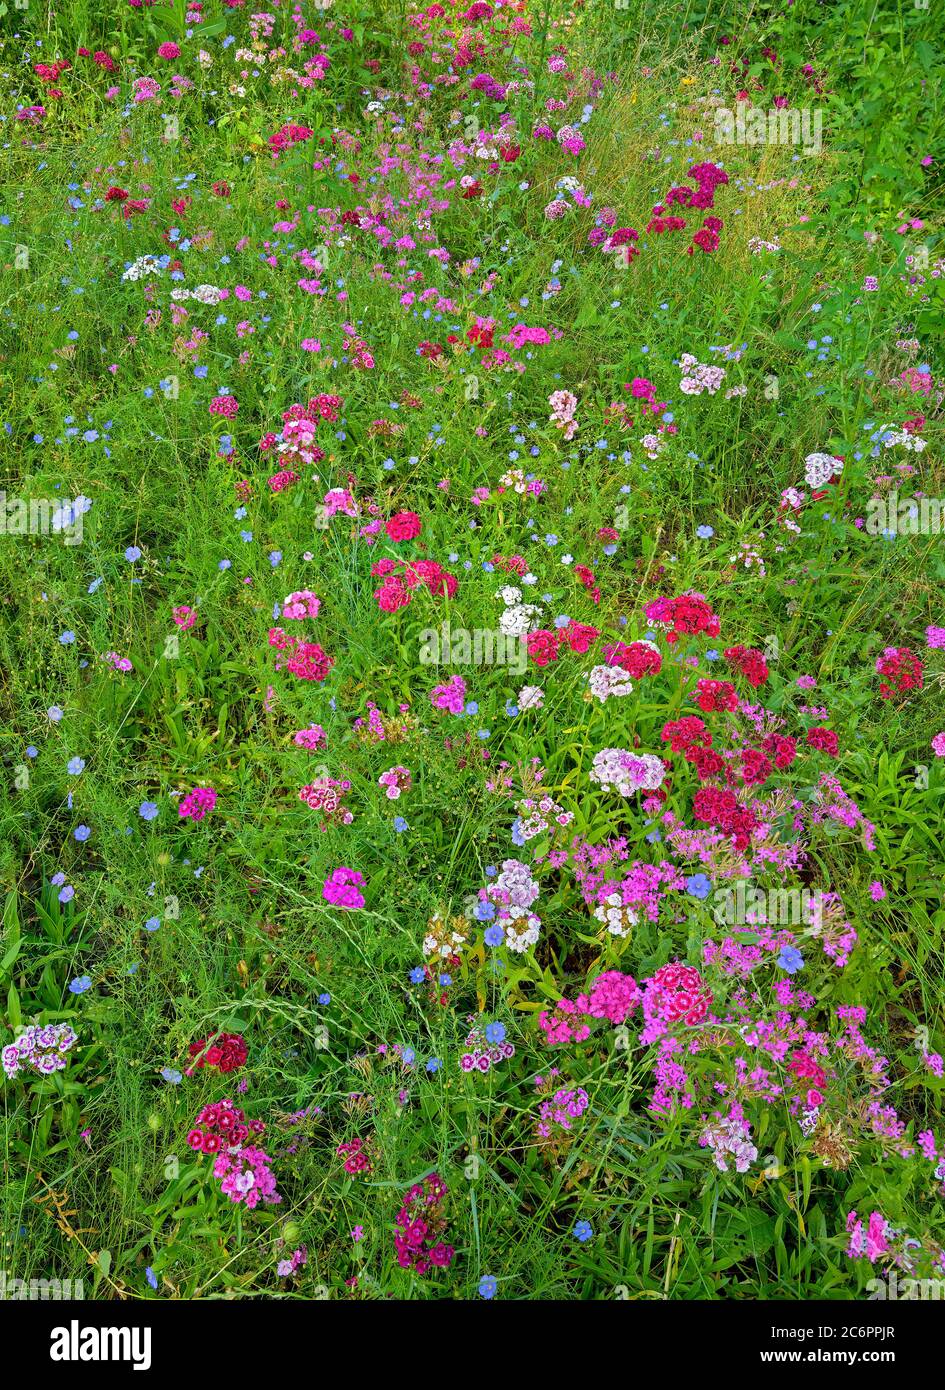 green meadow with colorful flourishing field flowers mostly red and pink Stock Photo